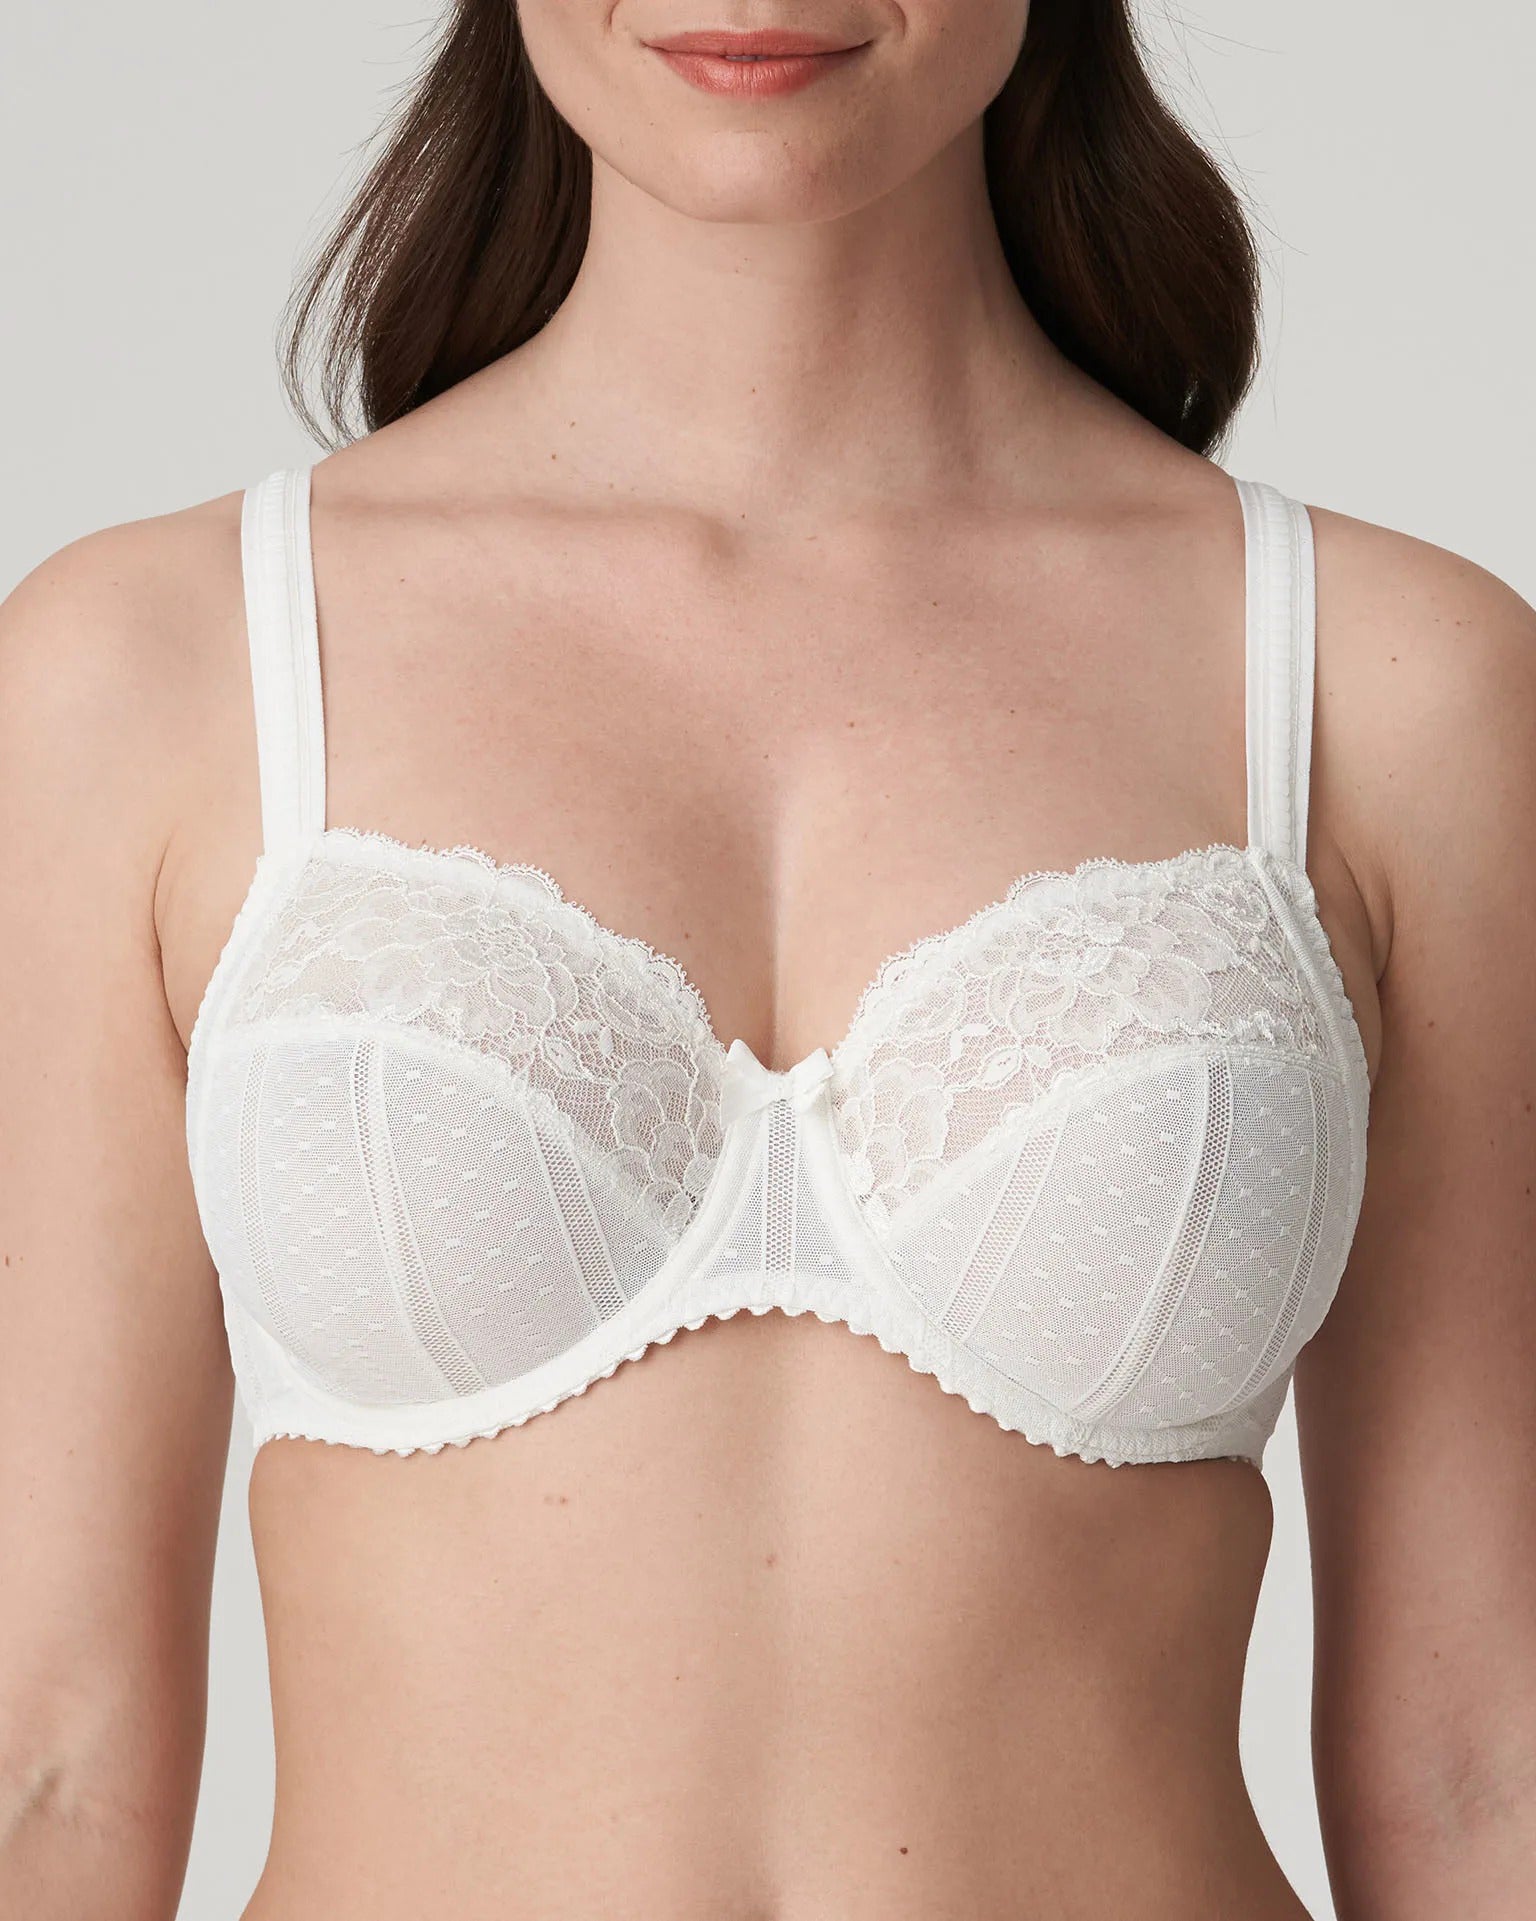 PrimaDonna Arau Top Without Cups Wireless Bra - An Intimate Affaire